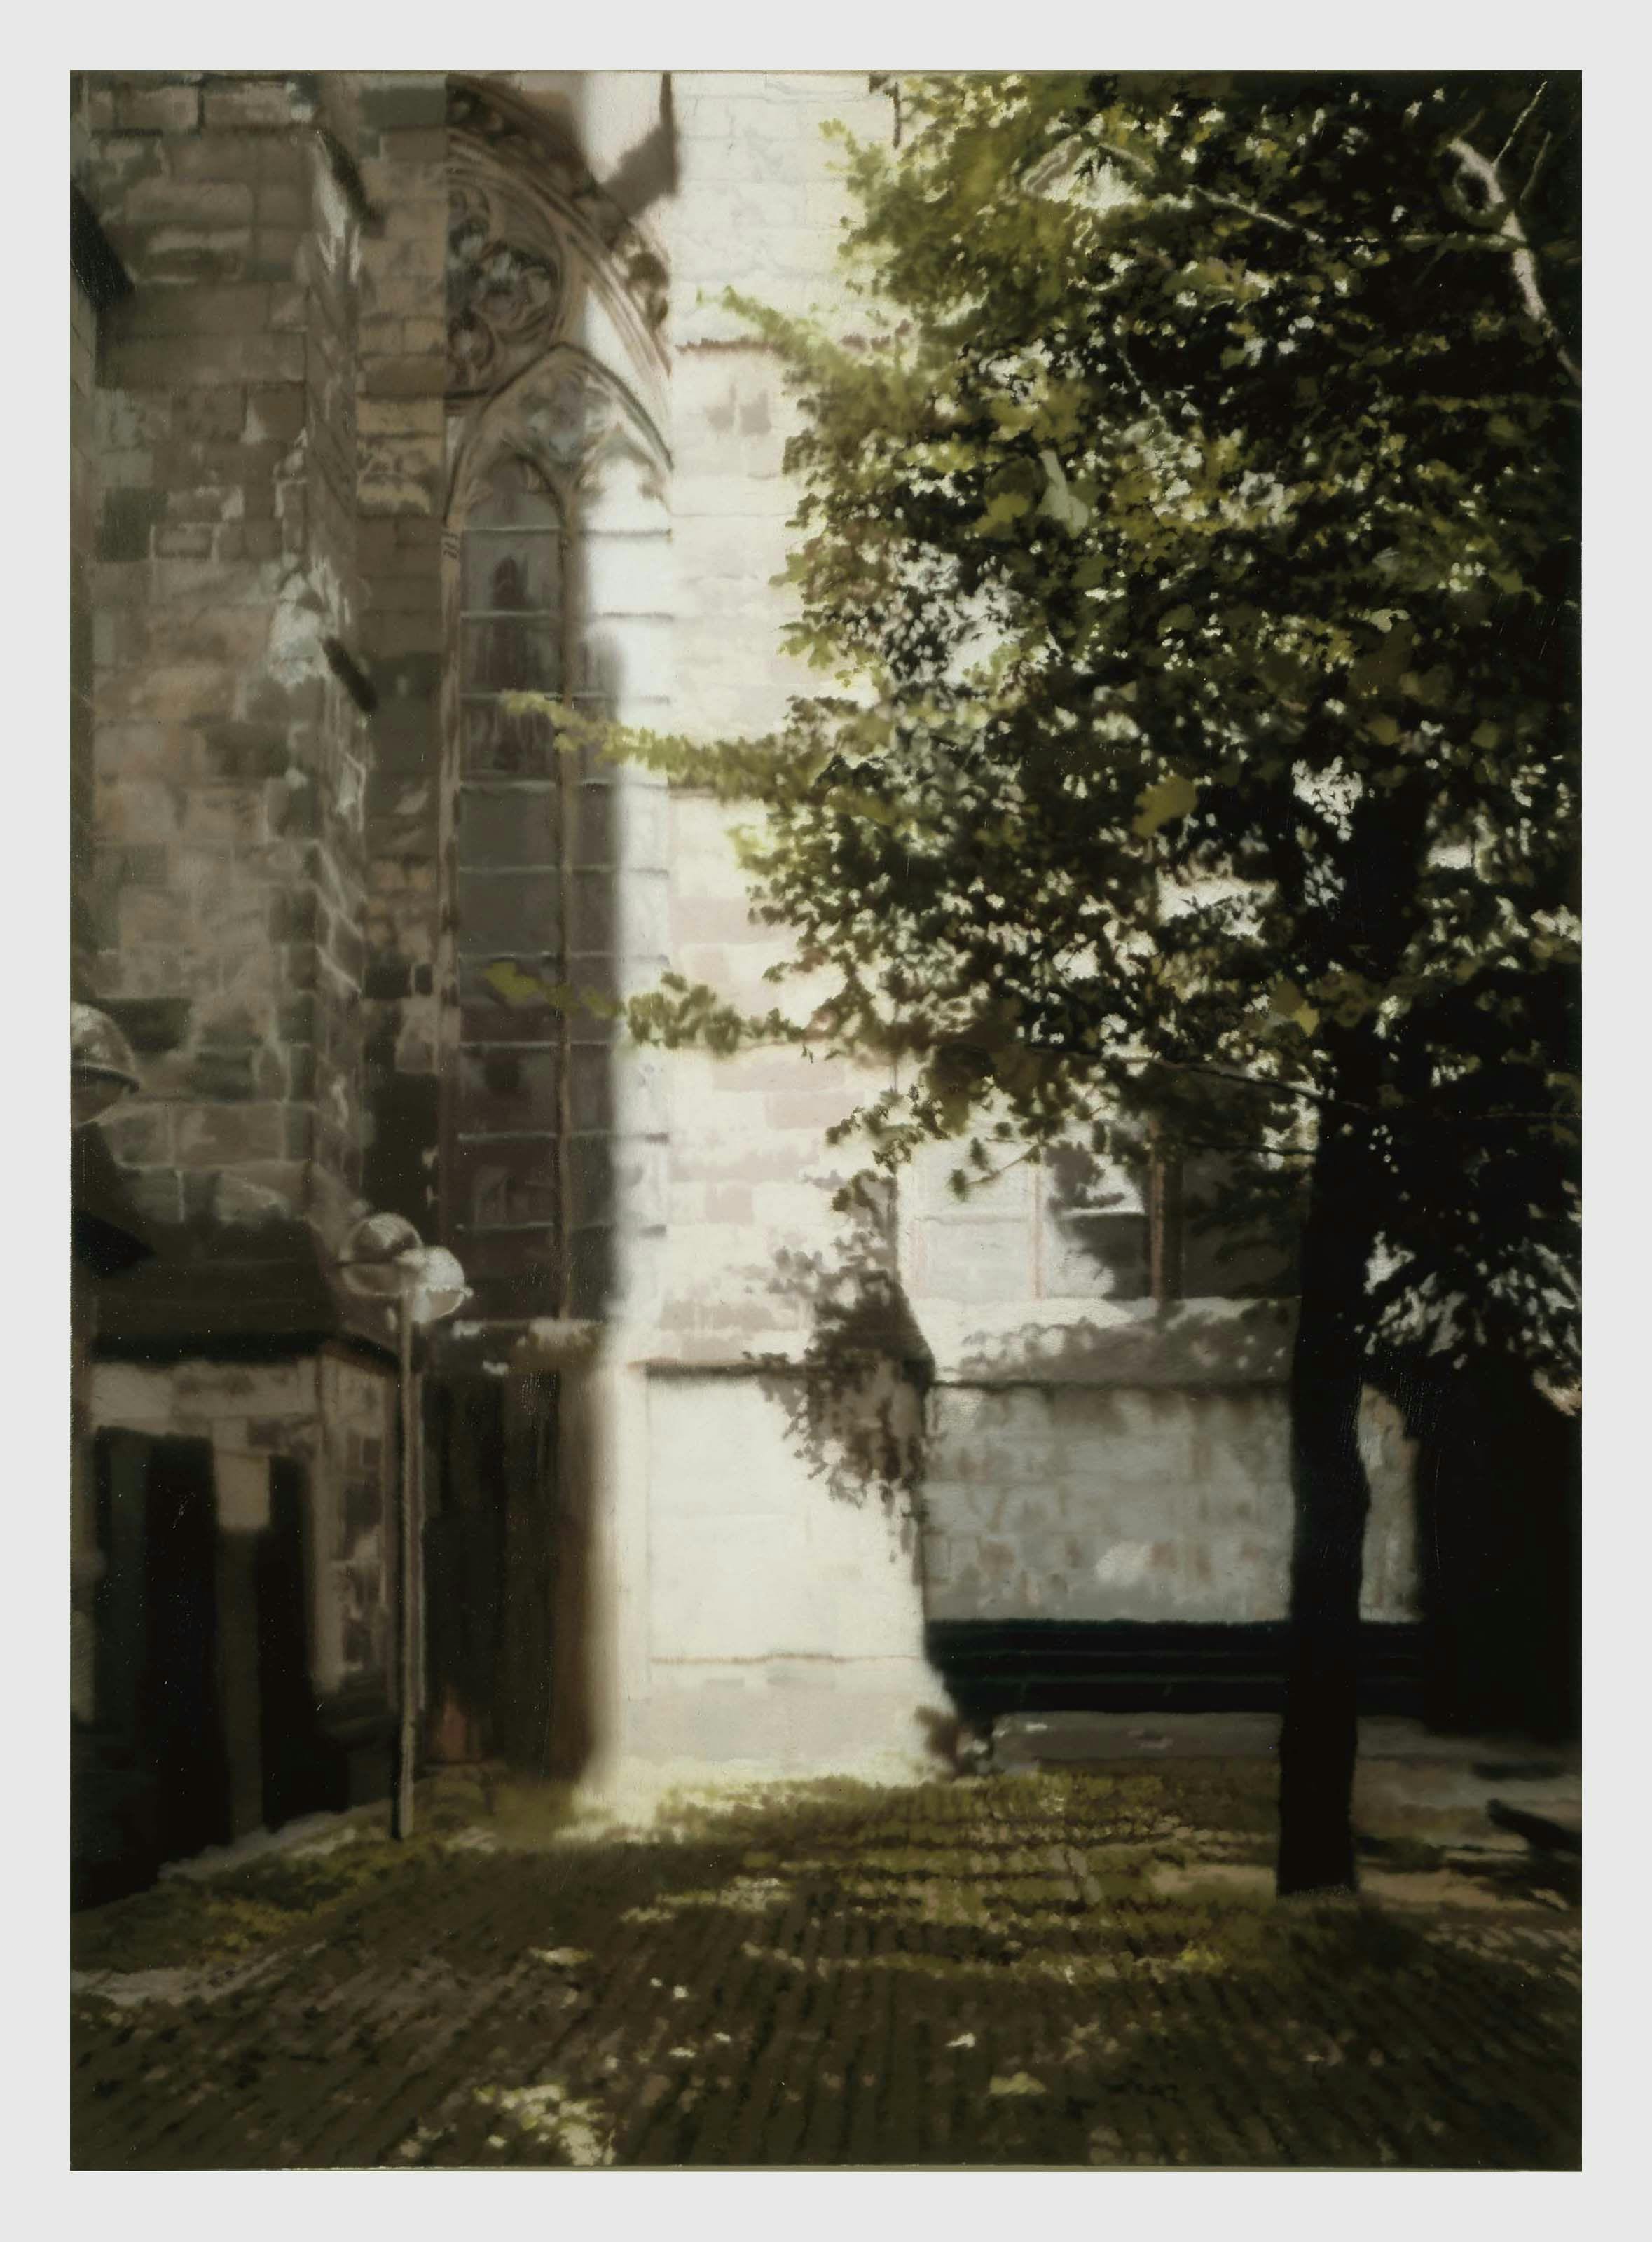 A painting by Gerhard Richter, titled ﻿Domecke (Cathedral Corner), dated 1987.